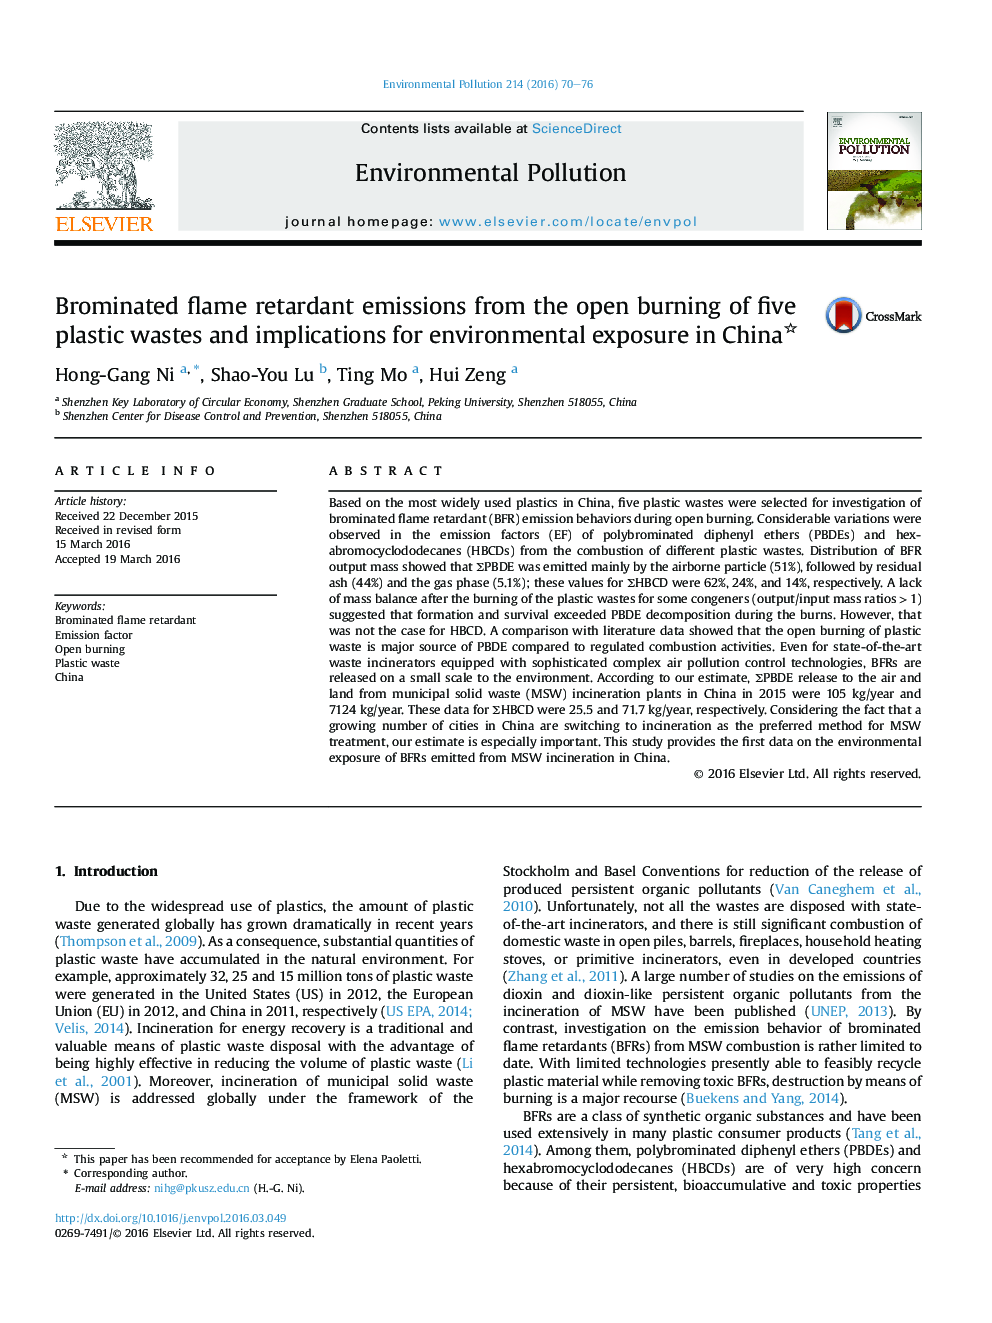 Brominated flame retardant emissions from the open burning of five plastic wastes and implications for environmental exposure in China